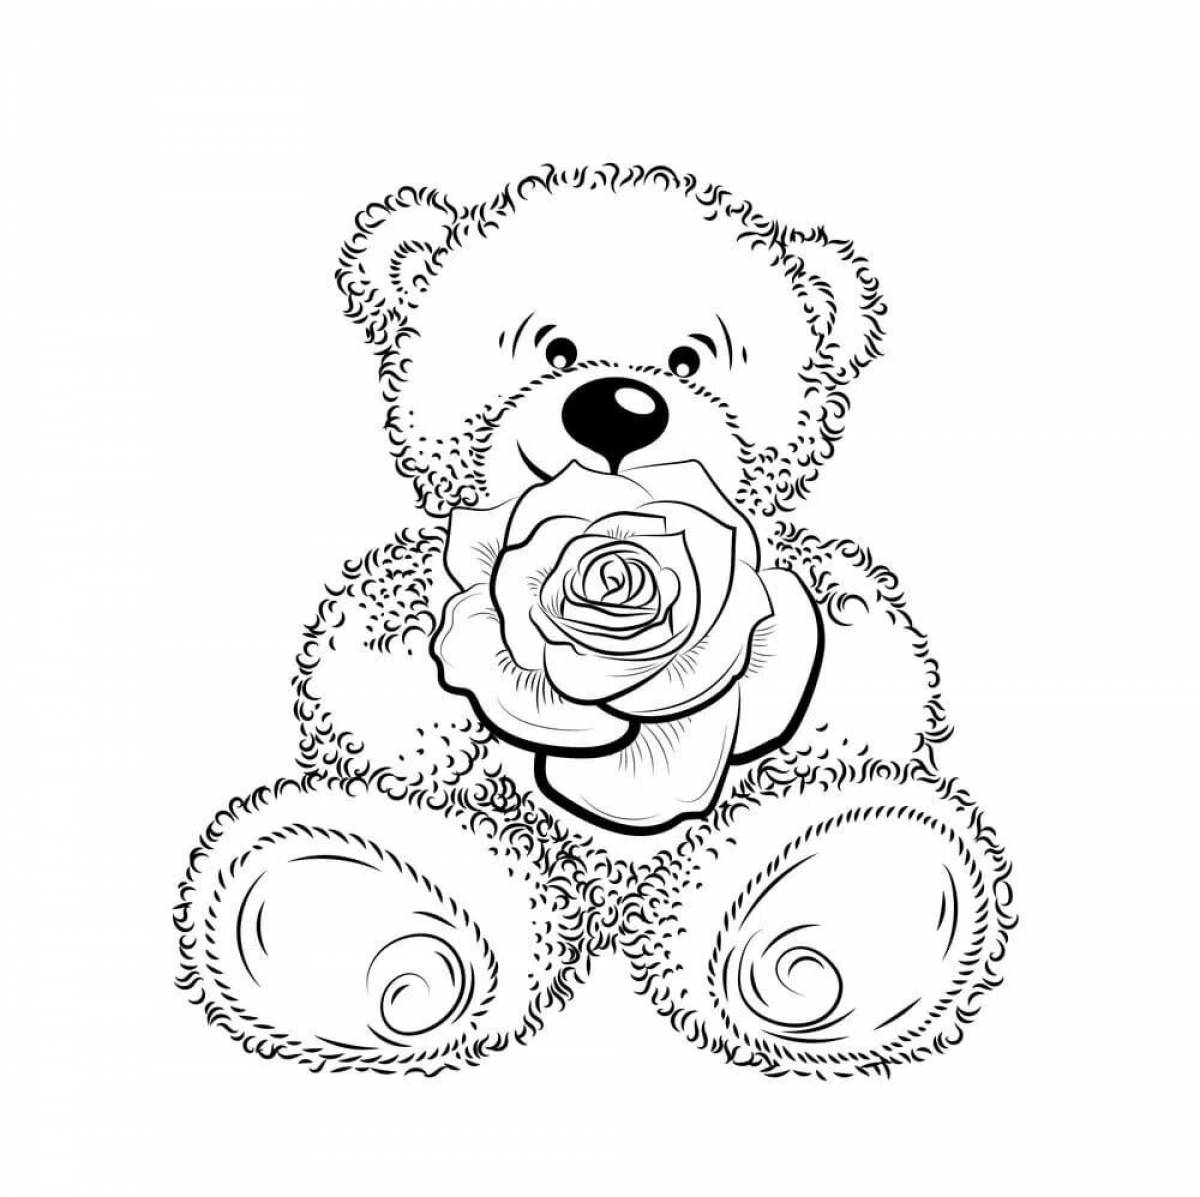 Smiling teddy bear coloring page